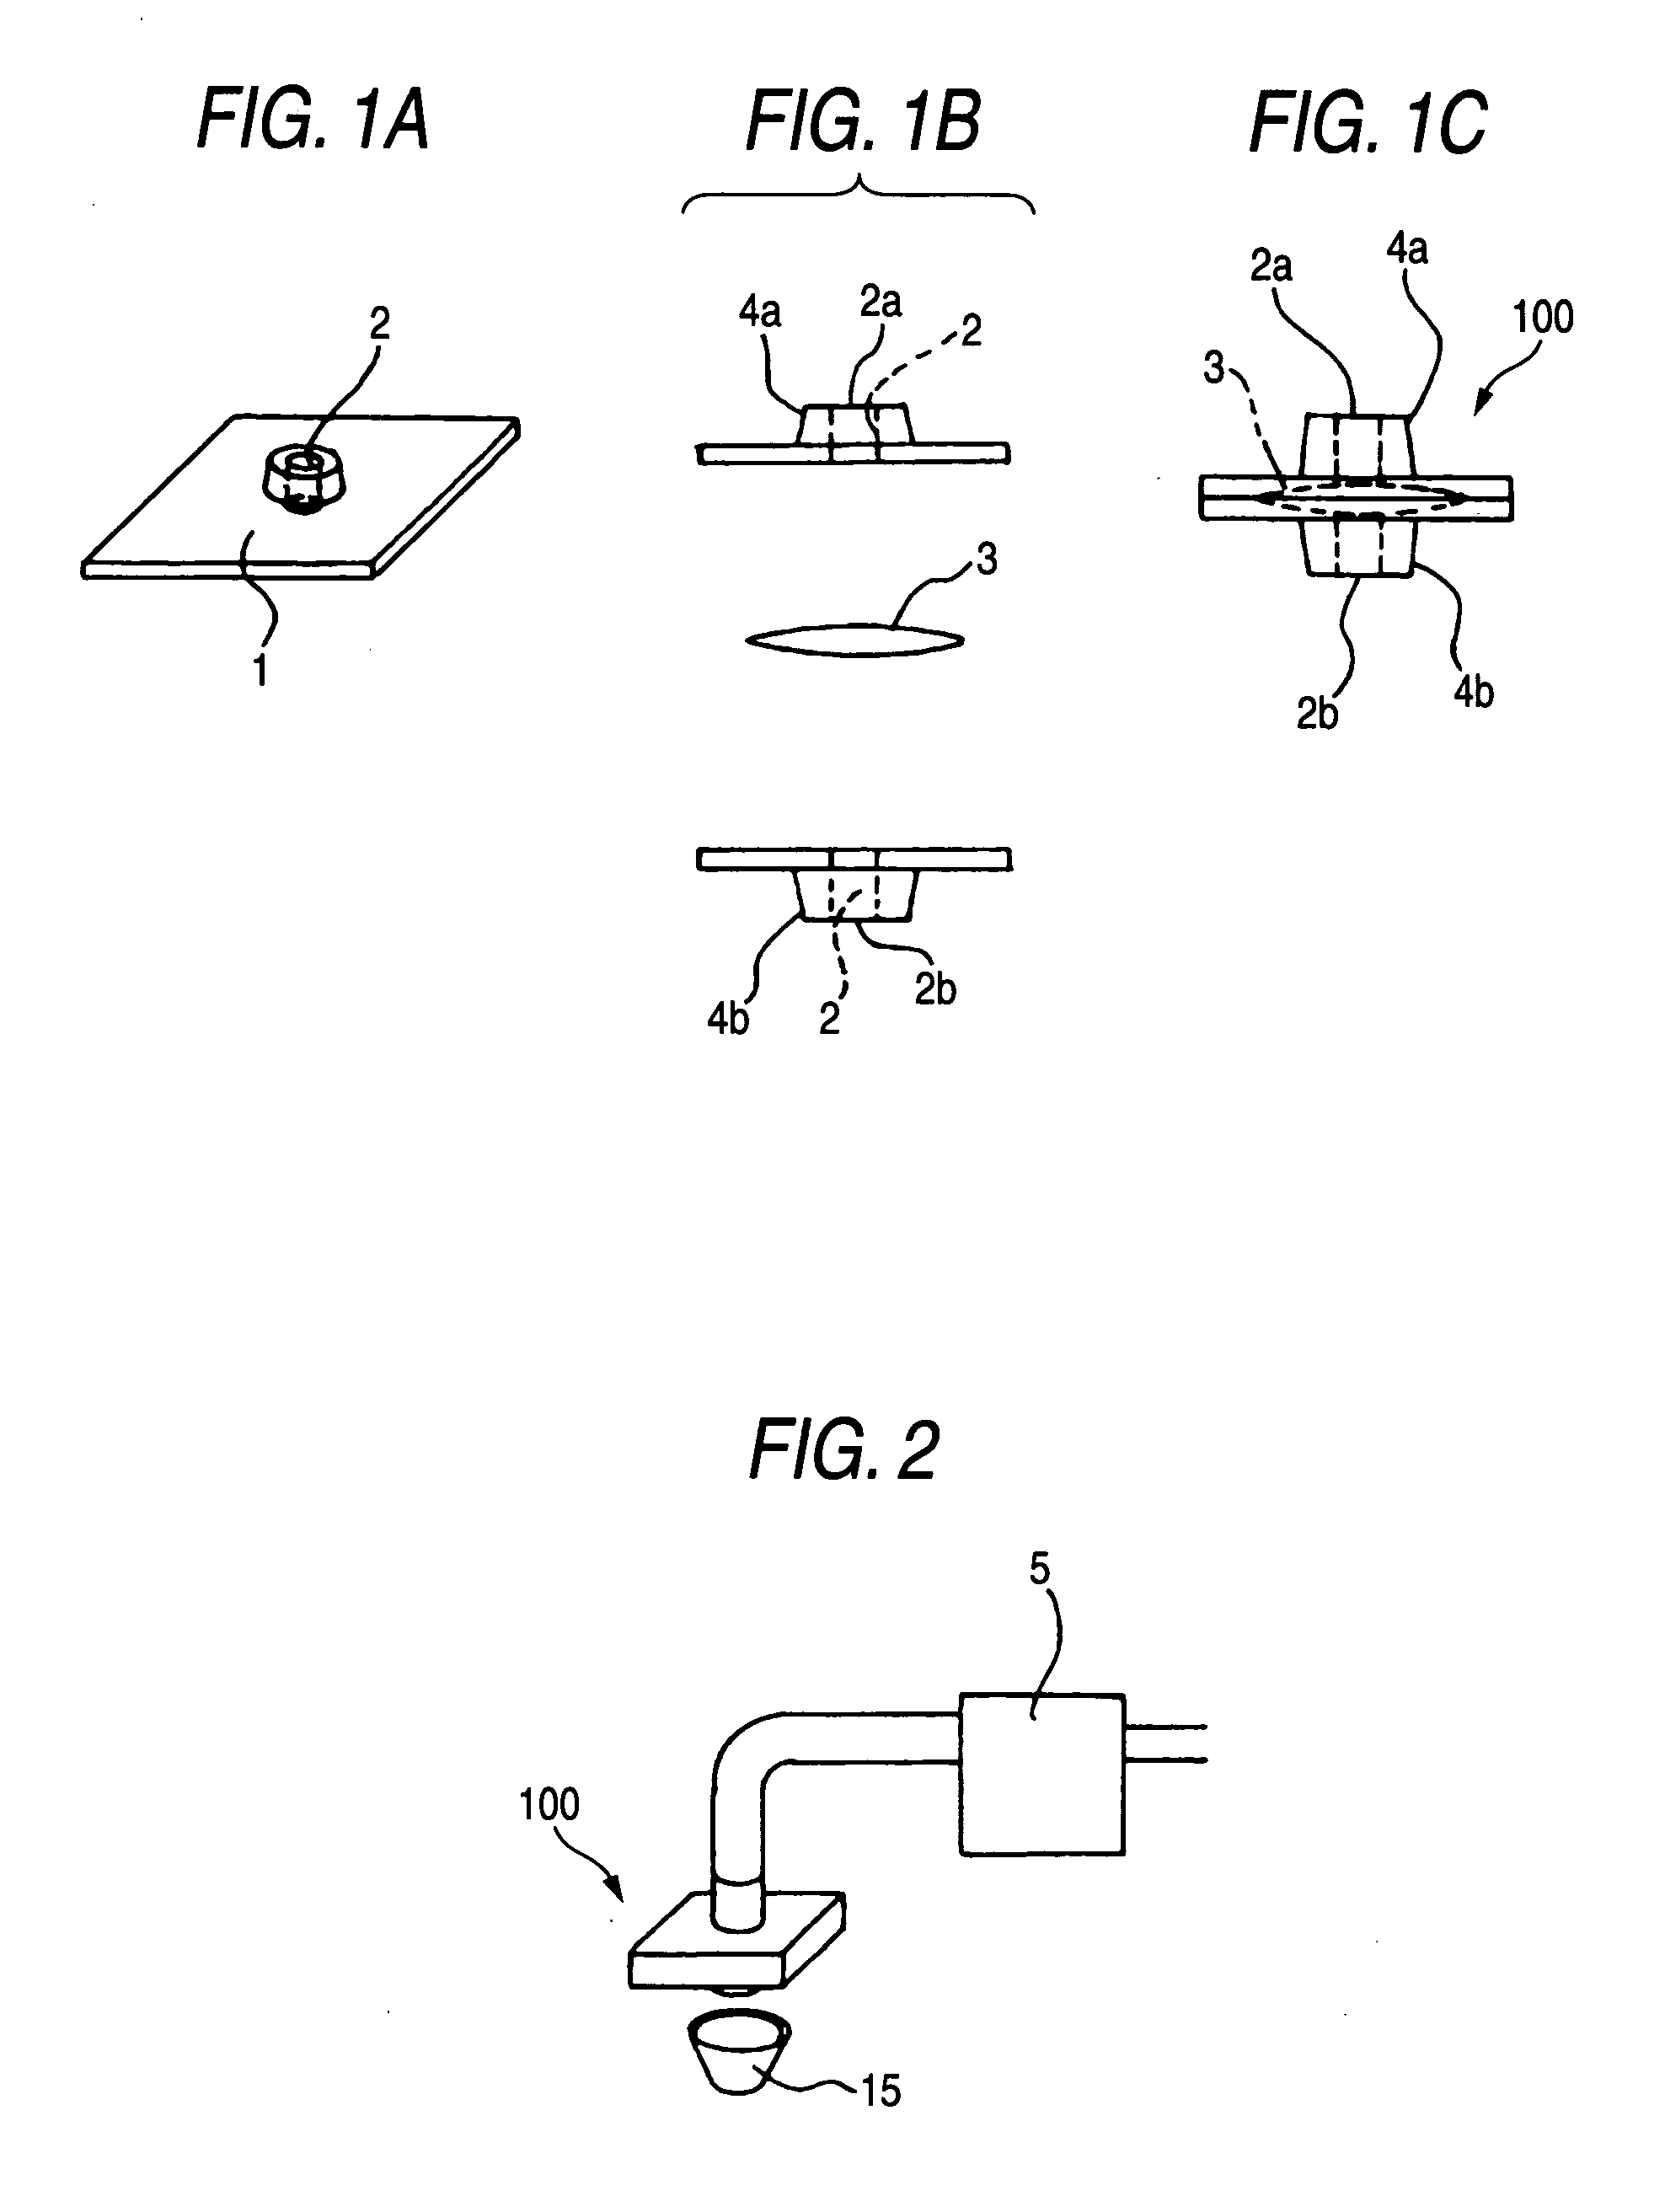 Microdevice for performing method of separating and purifying nucleic acid